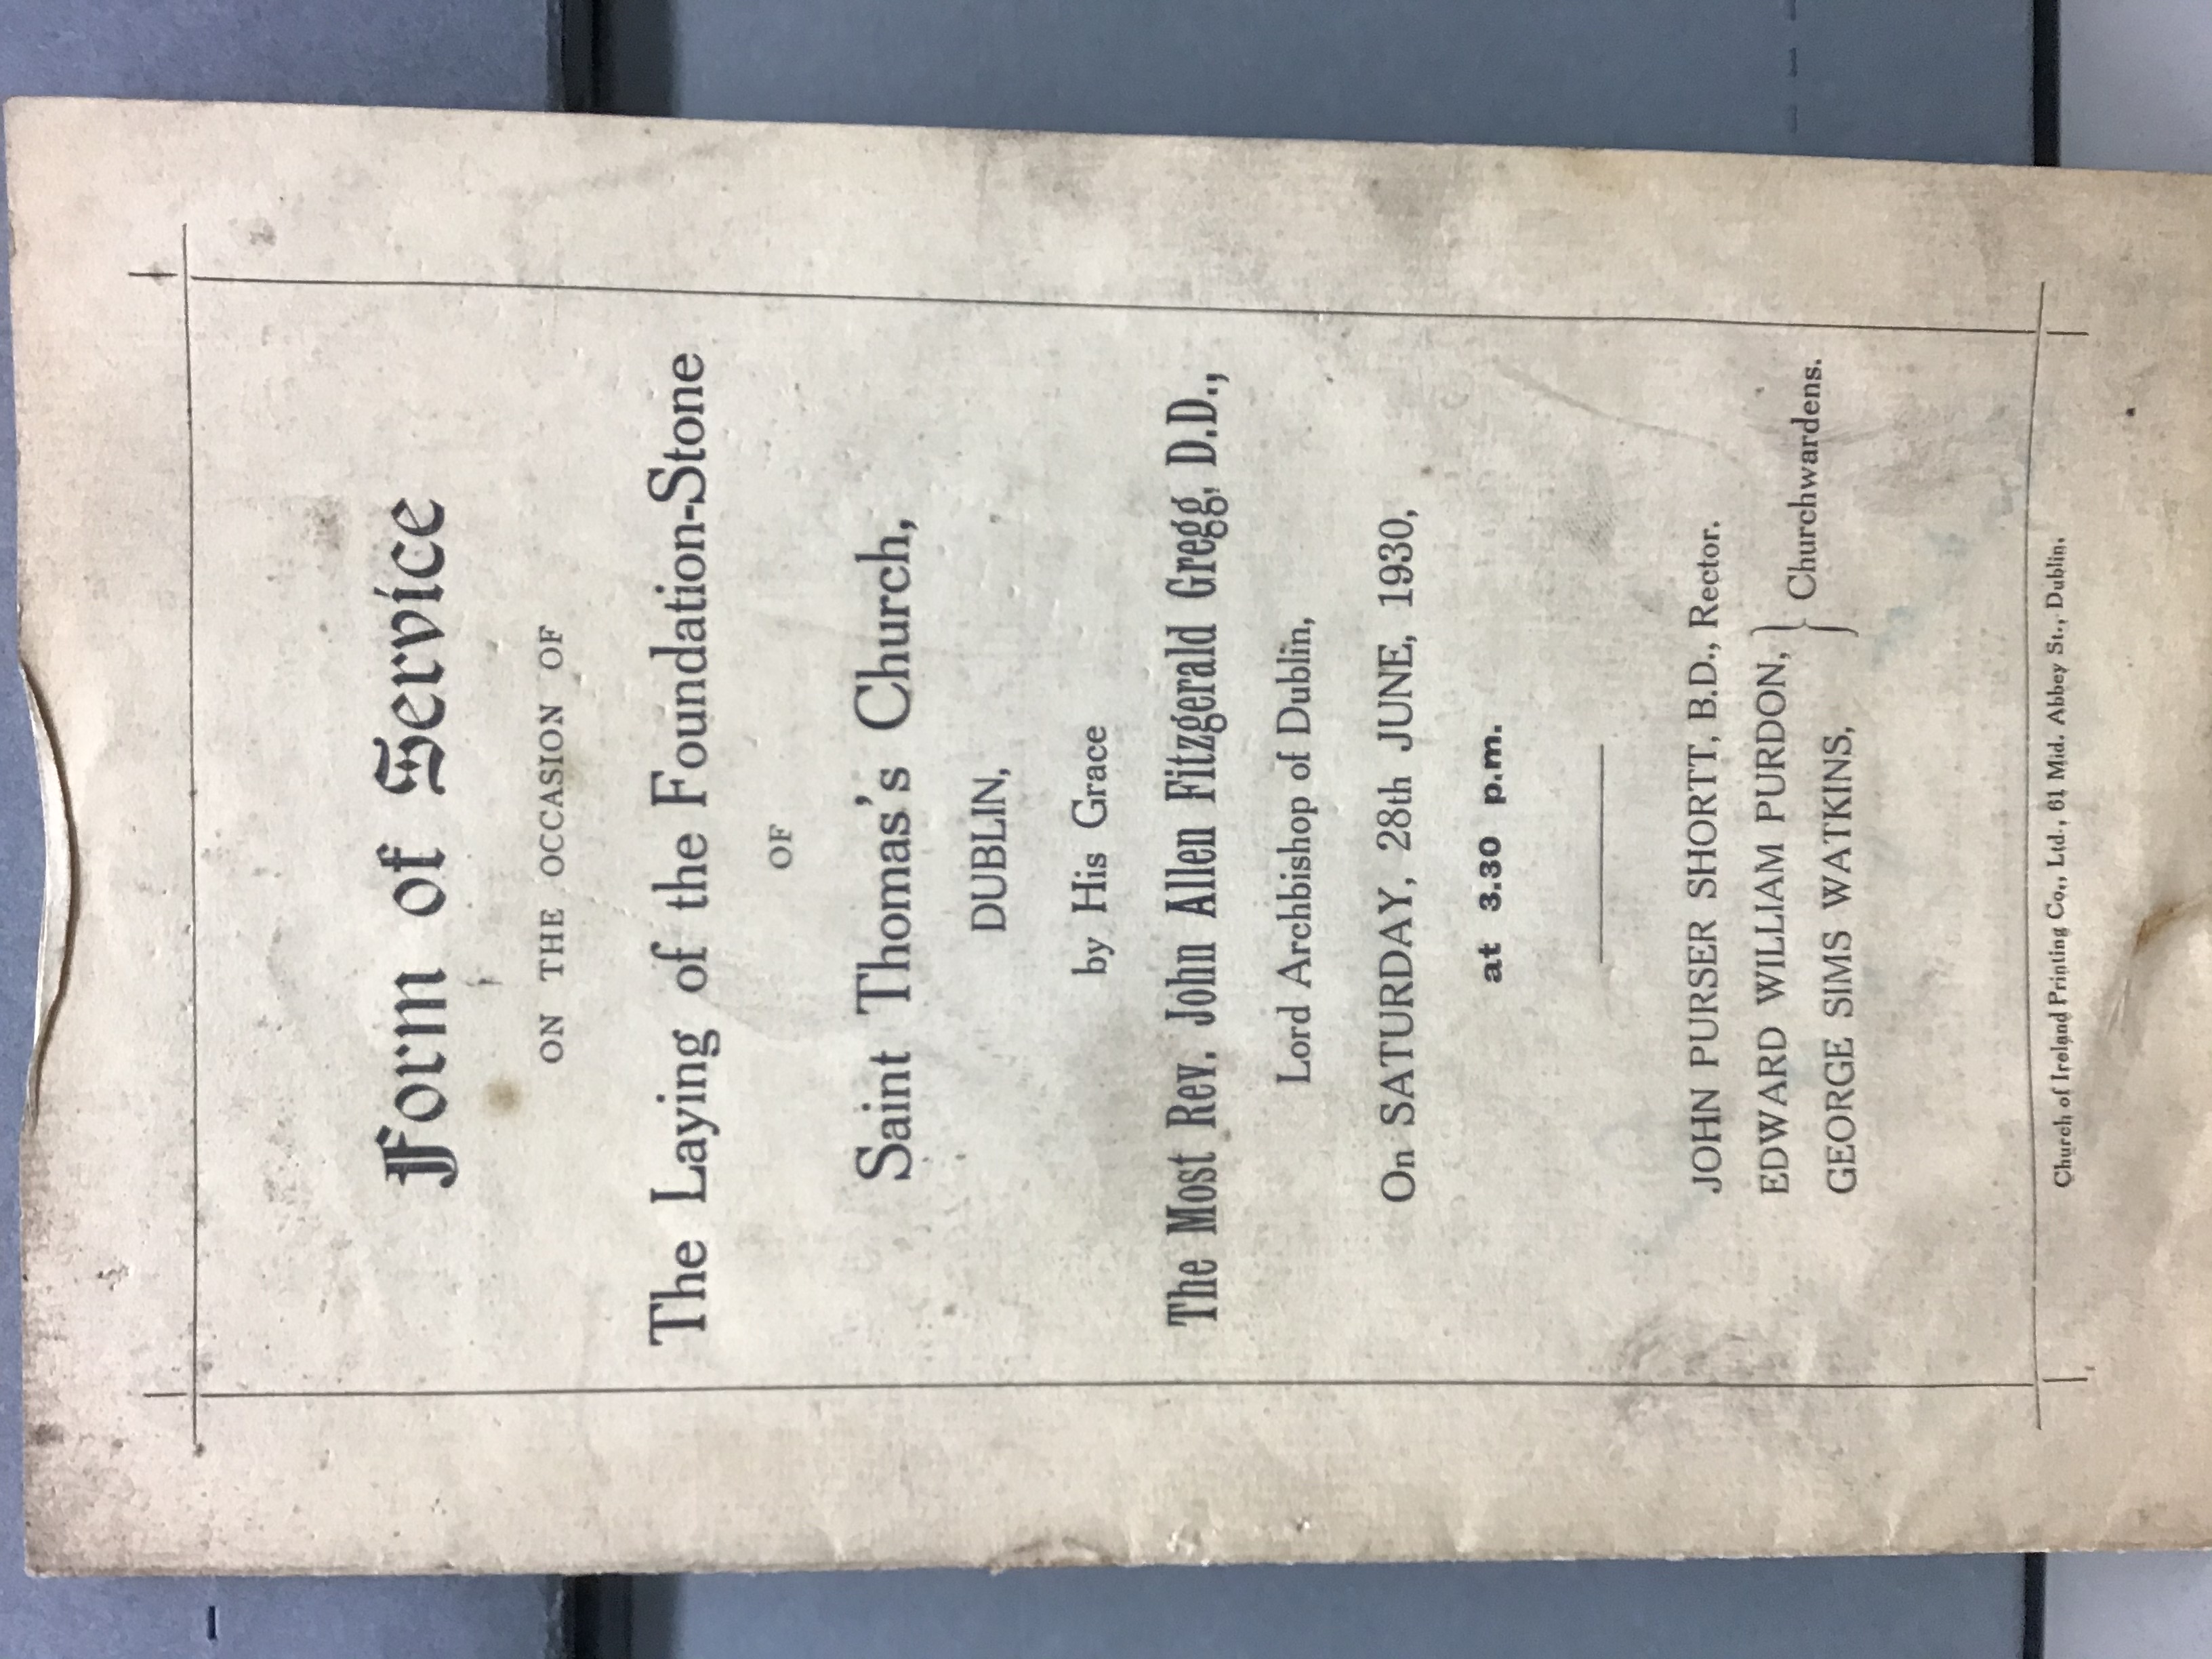 Pamphlet produced for the ceremony, 28 June 1930.